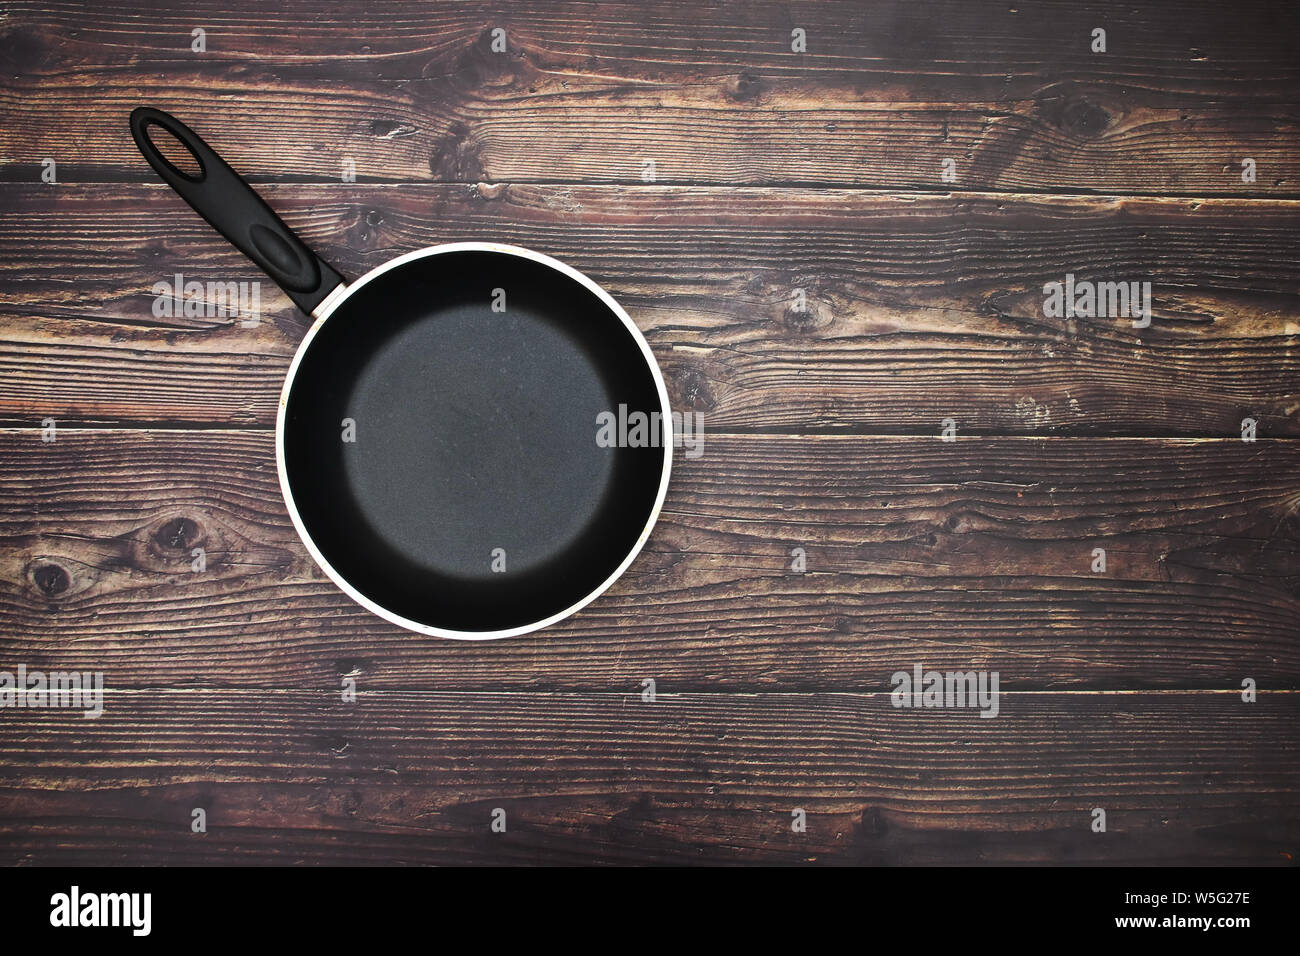 Empty pan on the table Stock Photo